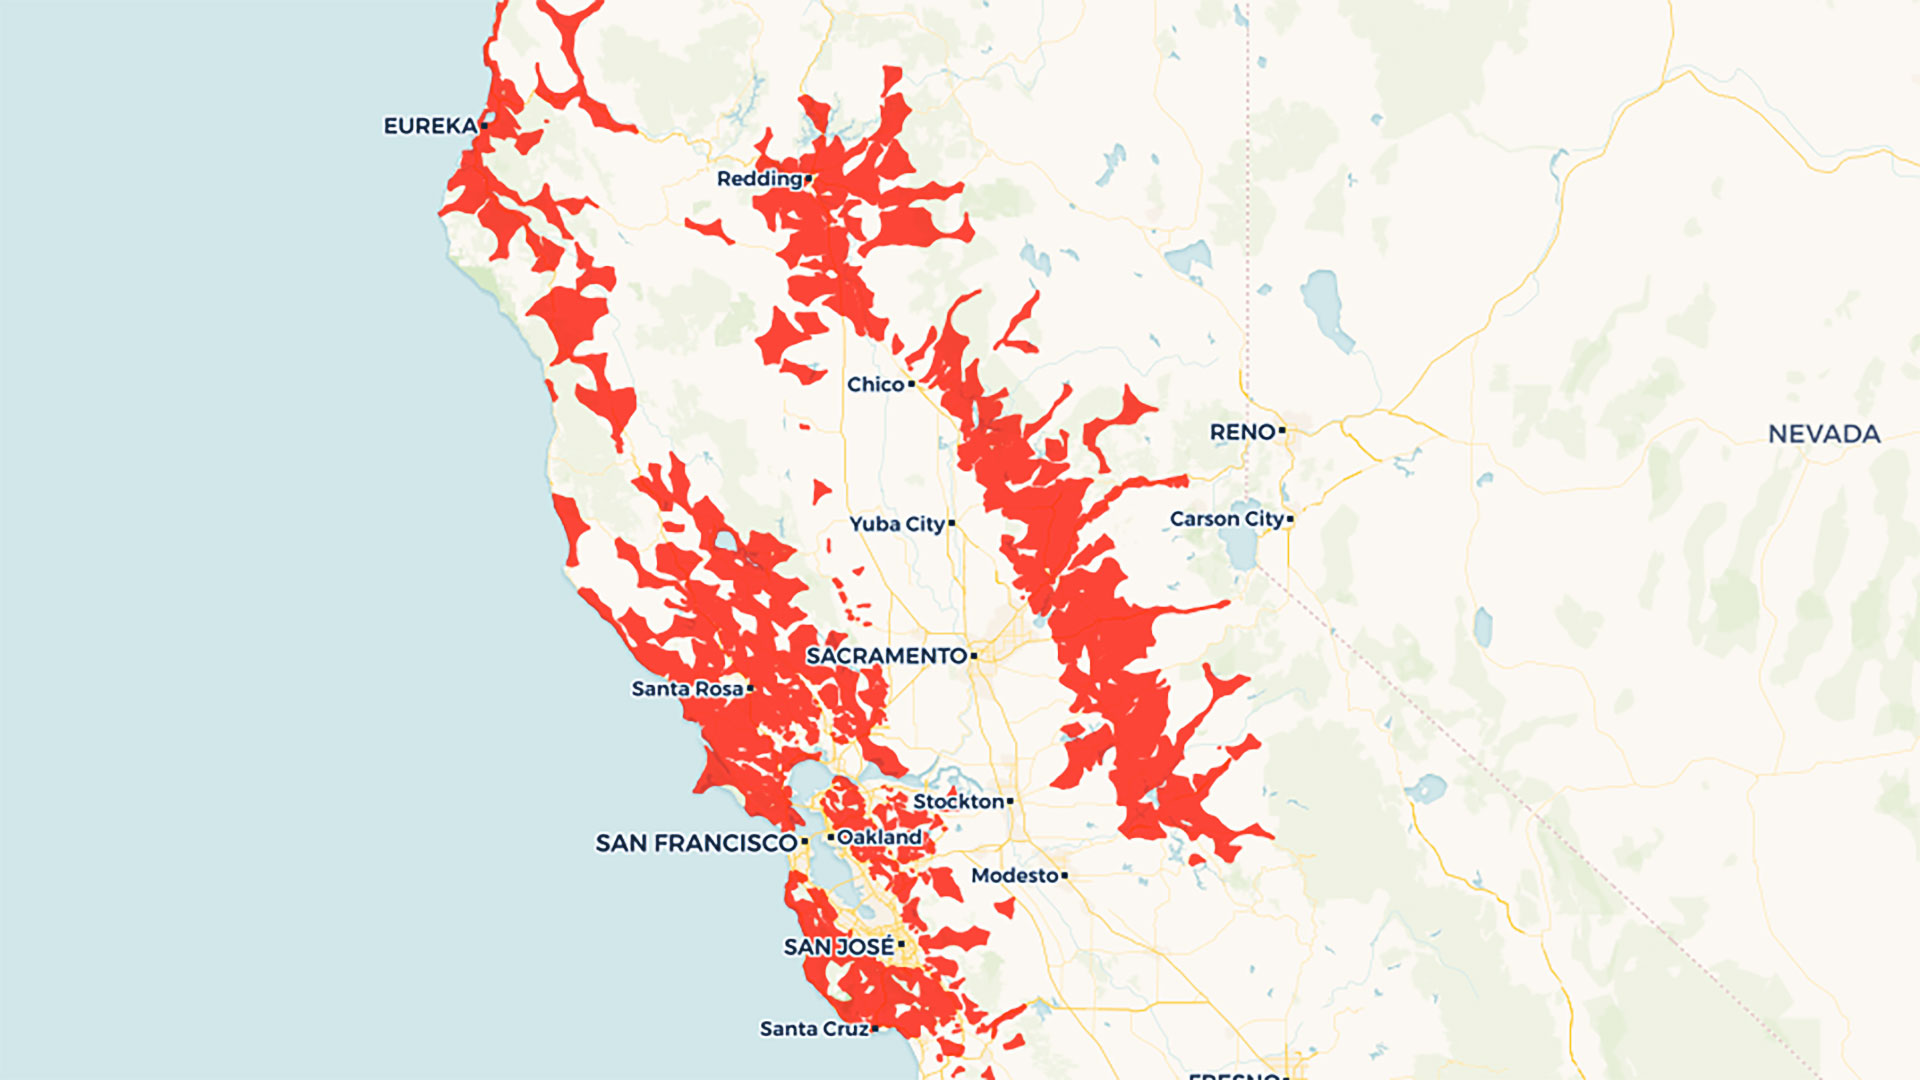 Maps Planned and Current PG&E Power Outages in Northern California